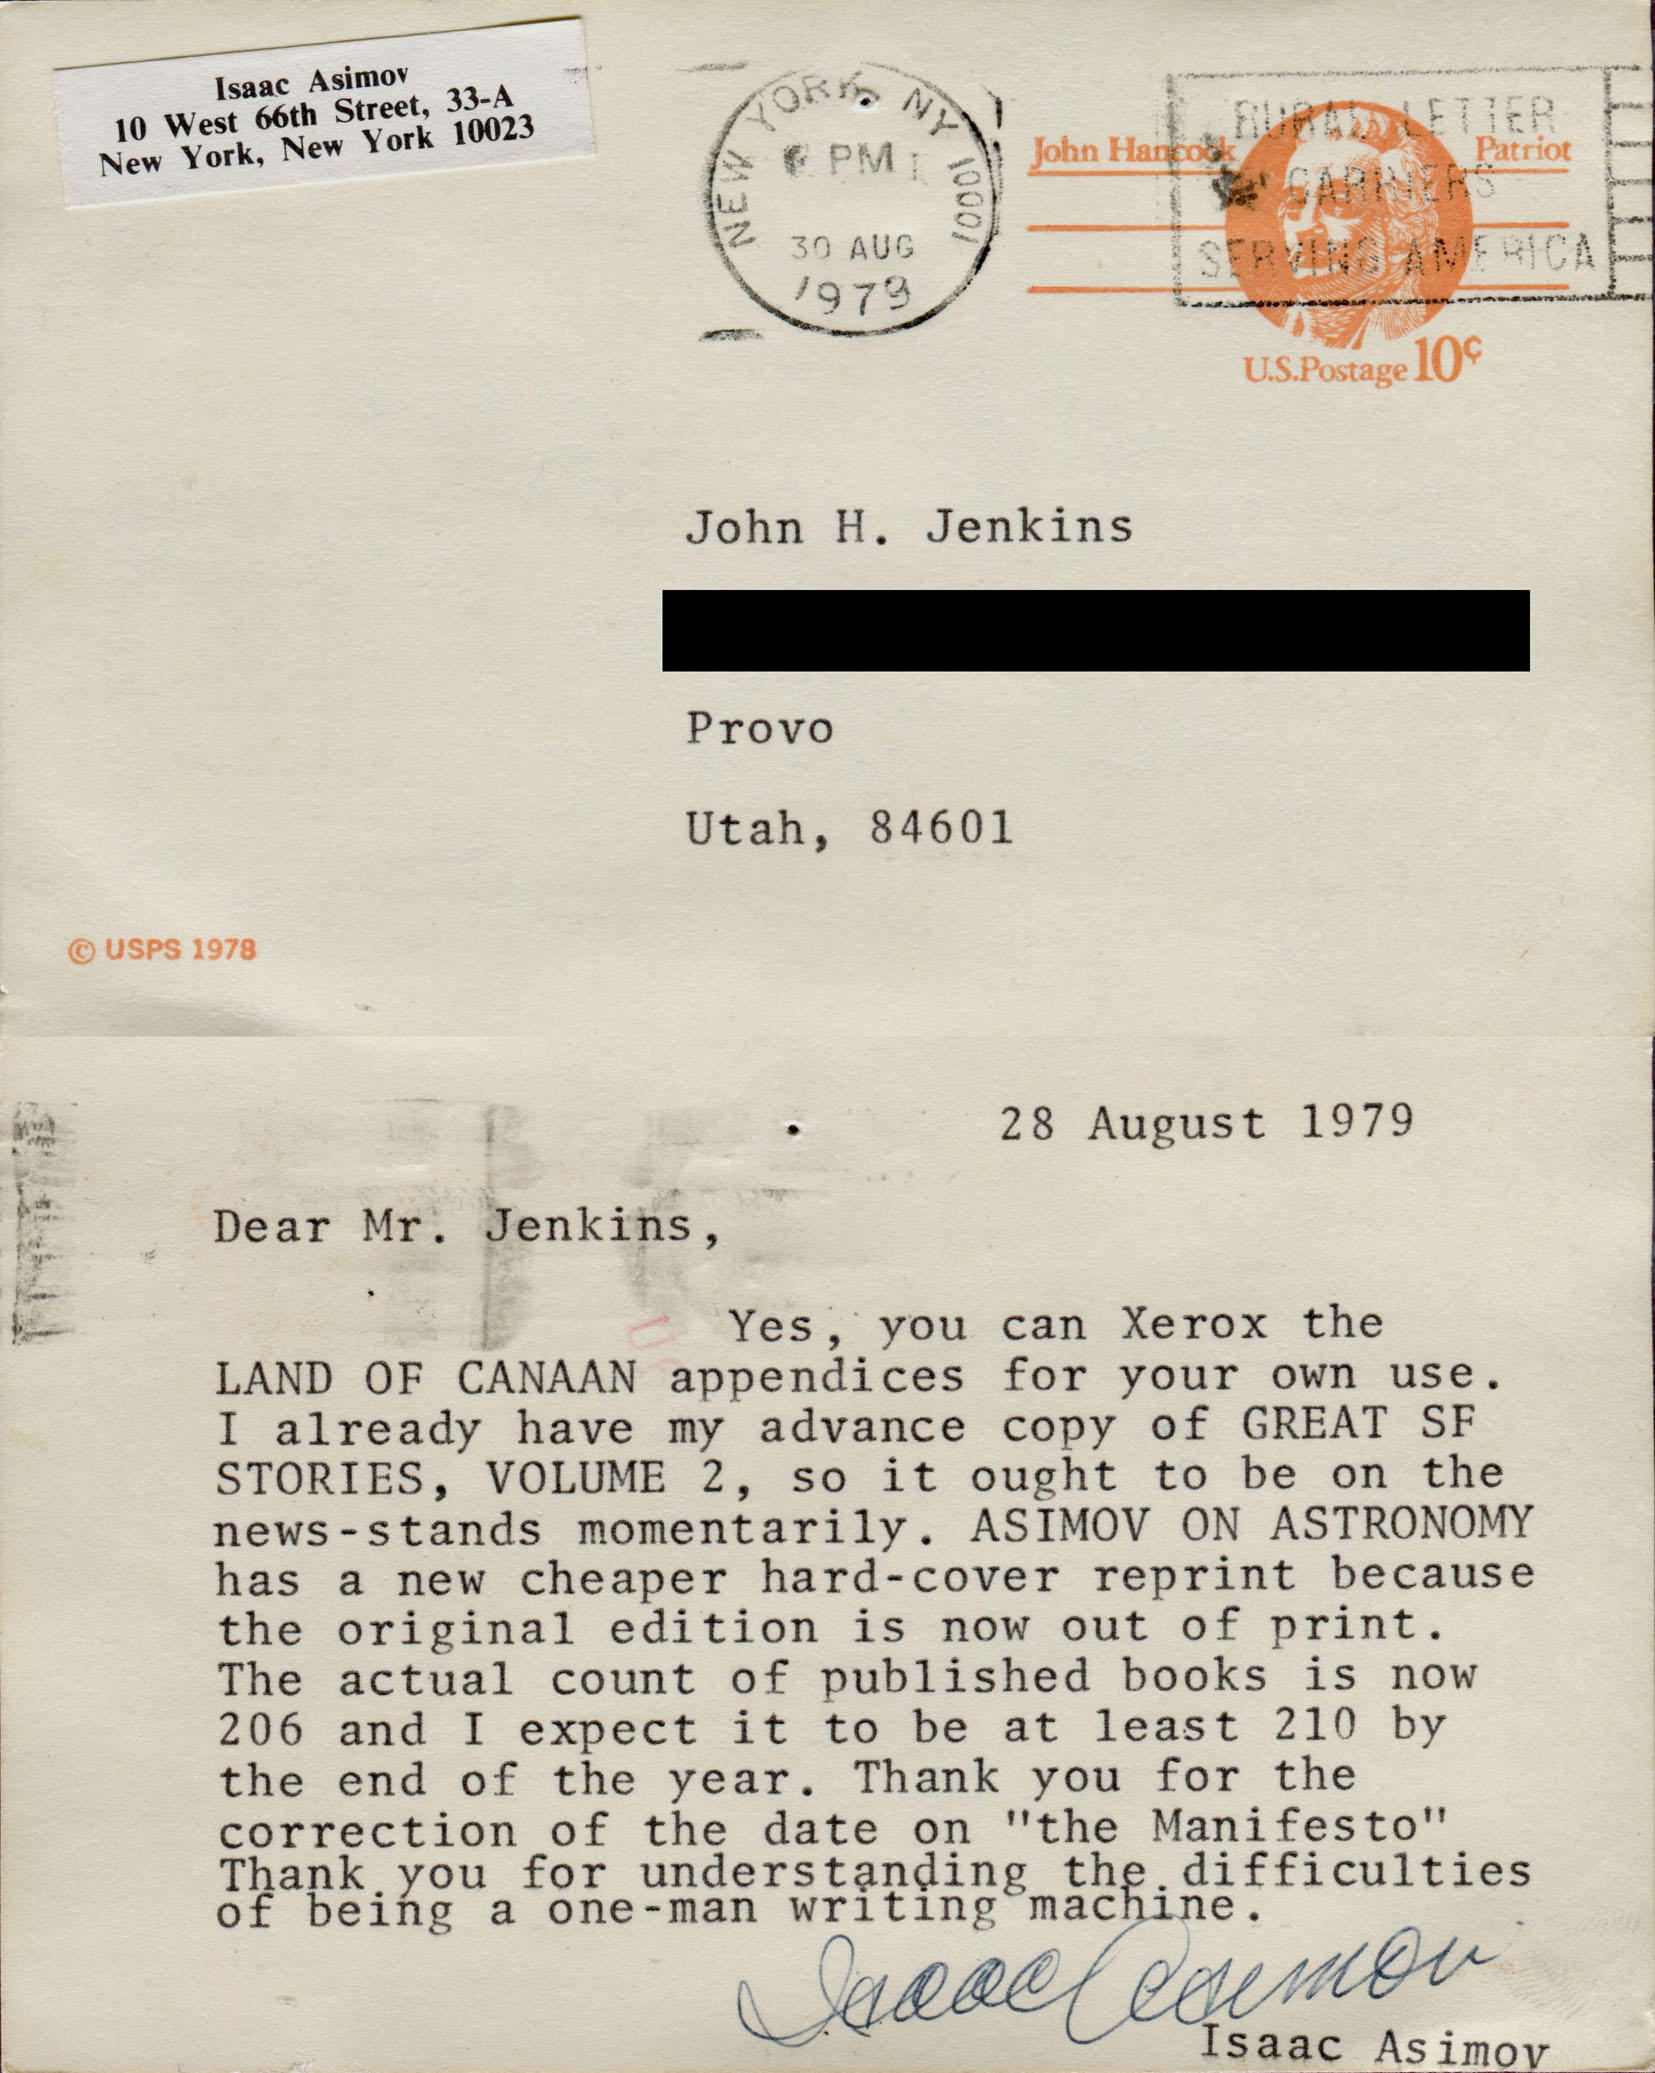 28 August 1979. Dear Mr. Jenkins, Yes, you can Xerox the LAND OF CANAAN appendices for your own use. I already have my advance copy of GREAT SF STORIES, VOLUME 2, so it ought to be on the news-stands momentarily. ASIMOV ON ASTRONOMY has a new cheaper hard-cover reprint because the original edition is now out of print. The actual count of published books is now 206 and I expect it to be at least 210 by the end of the year. Thank you for the correction of the date on 'the Manifesto' Thank you for understanding the difficulties of being a one-man writing machine. Isaac Asimov